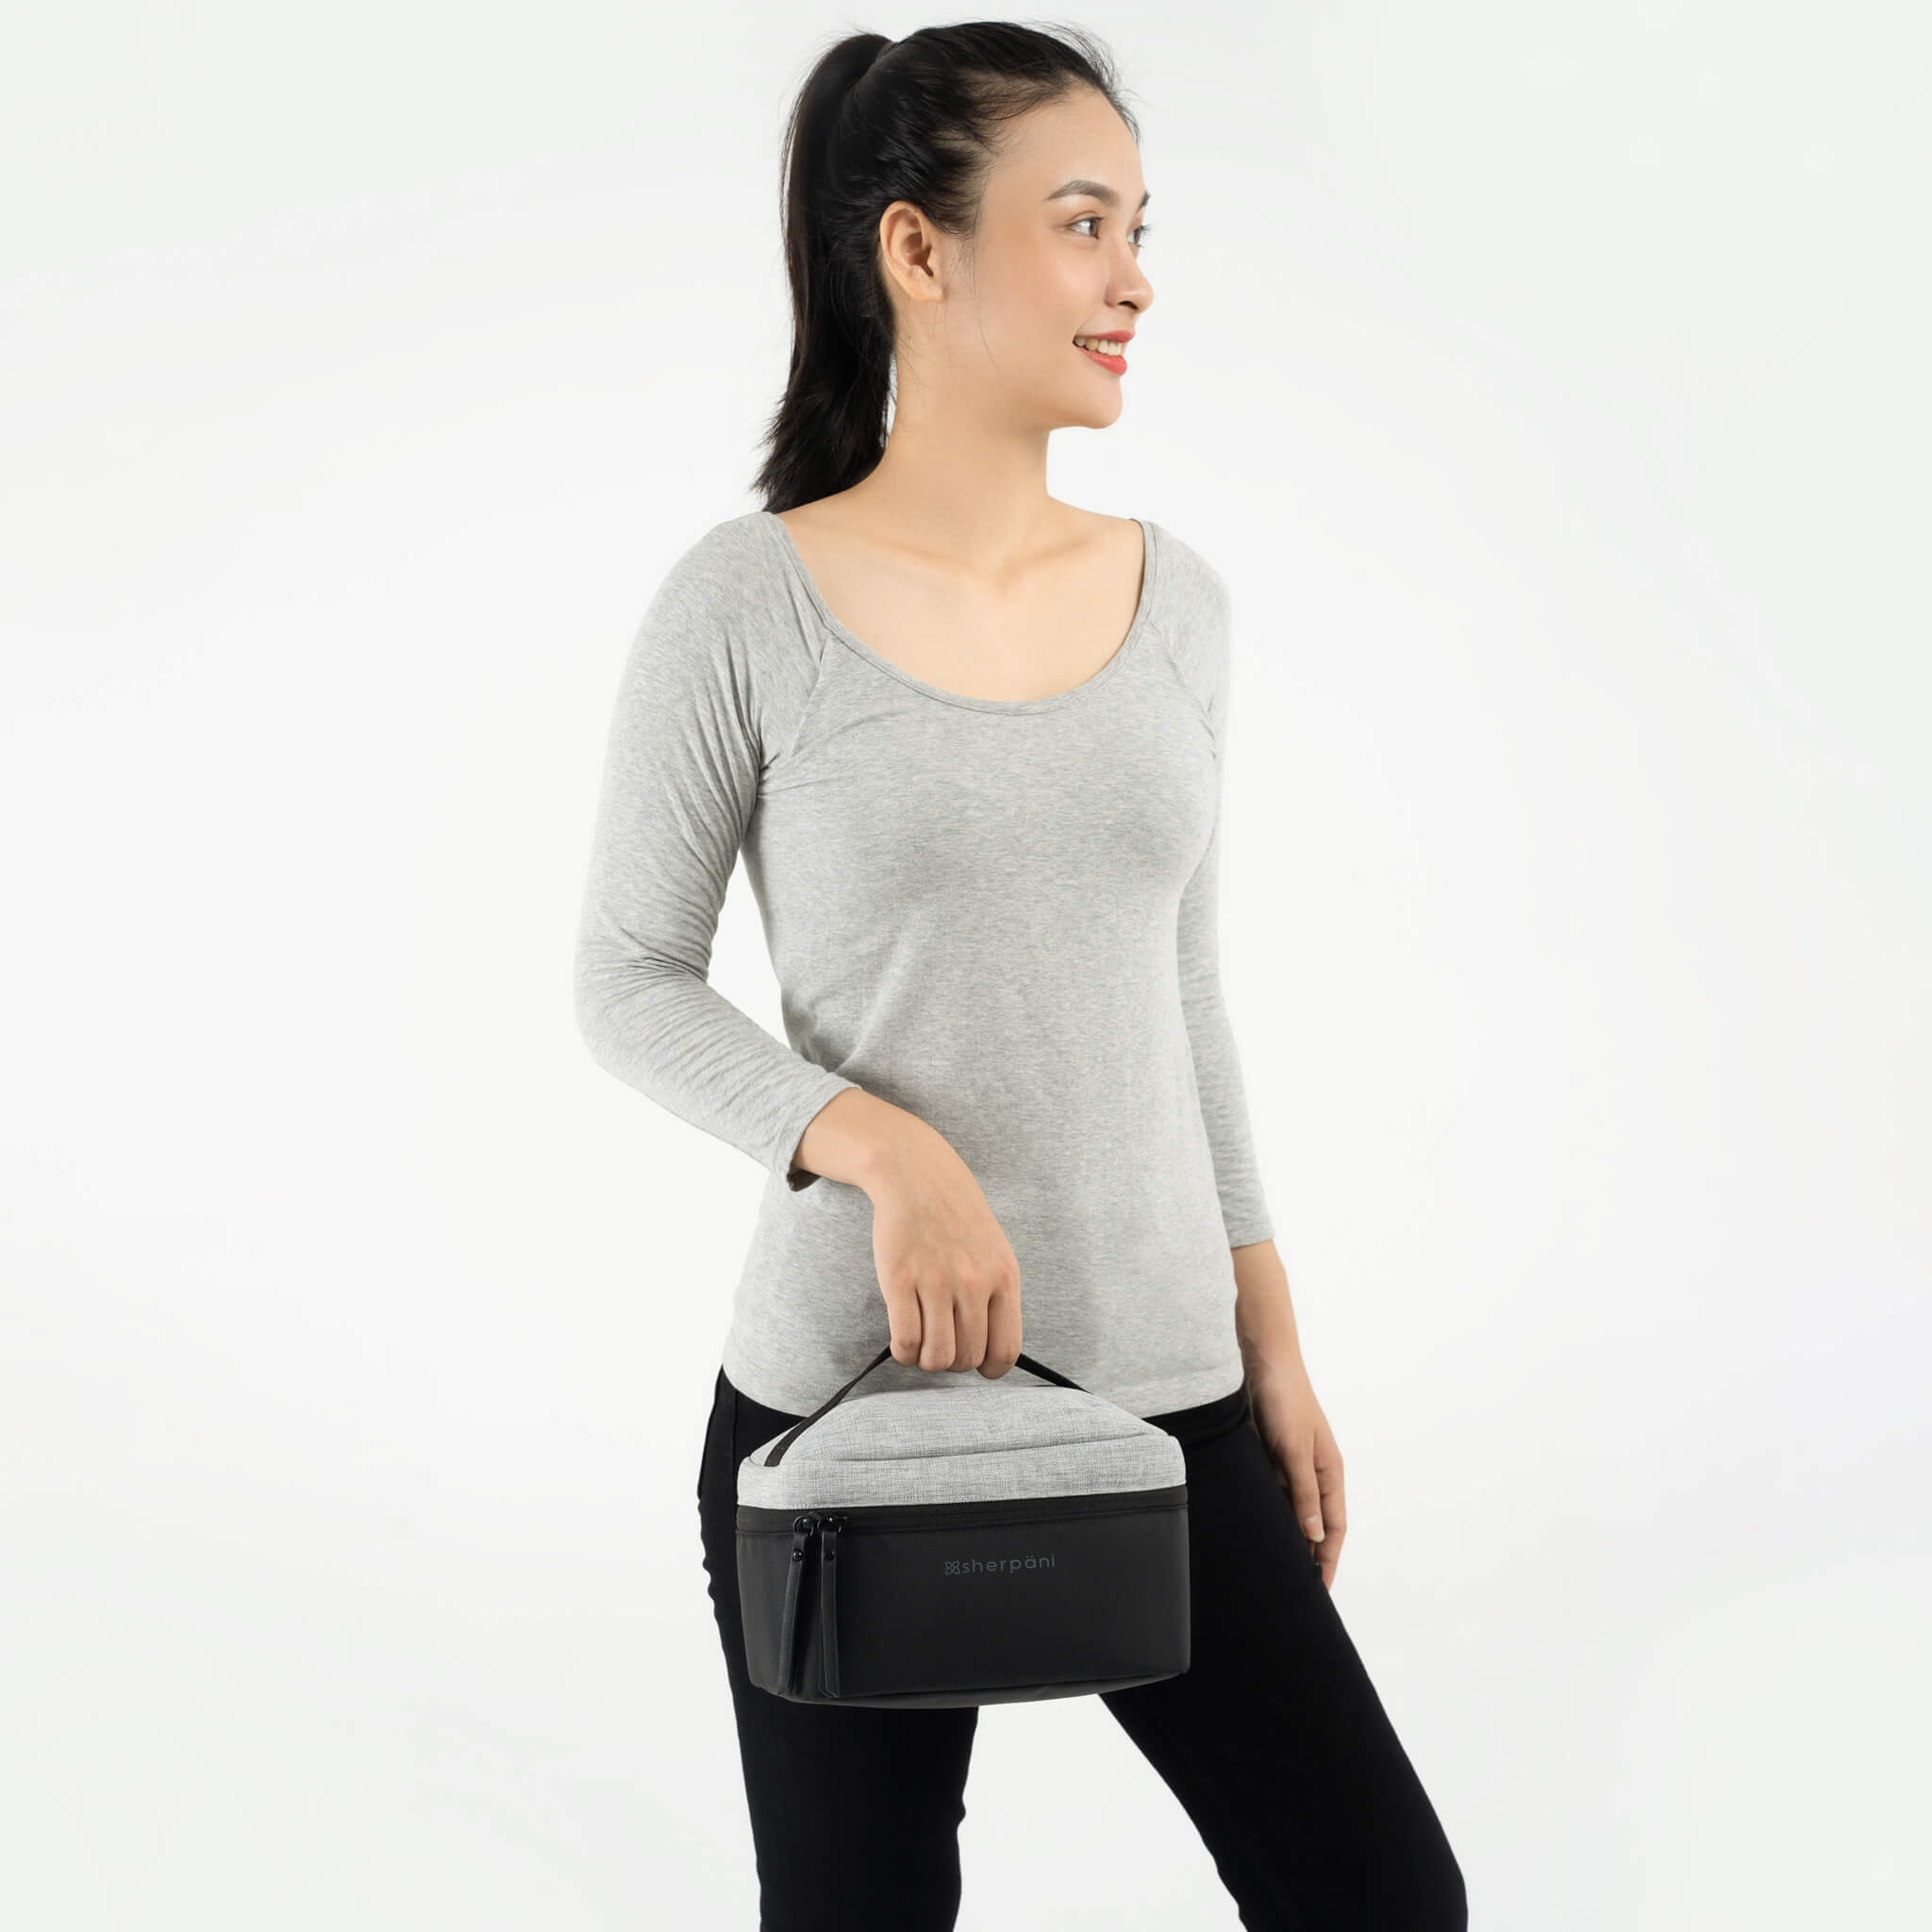 A model wearing black leggings and a gray top is holding Sherpani travel accessory the Savannah. #color_sterling #color_sterling